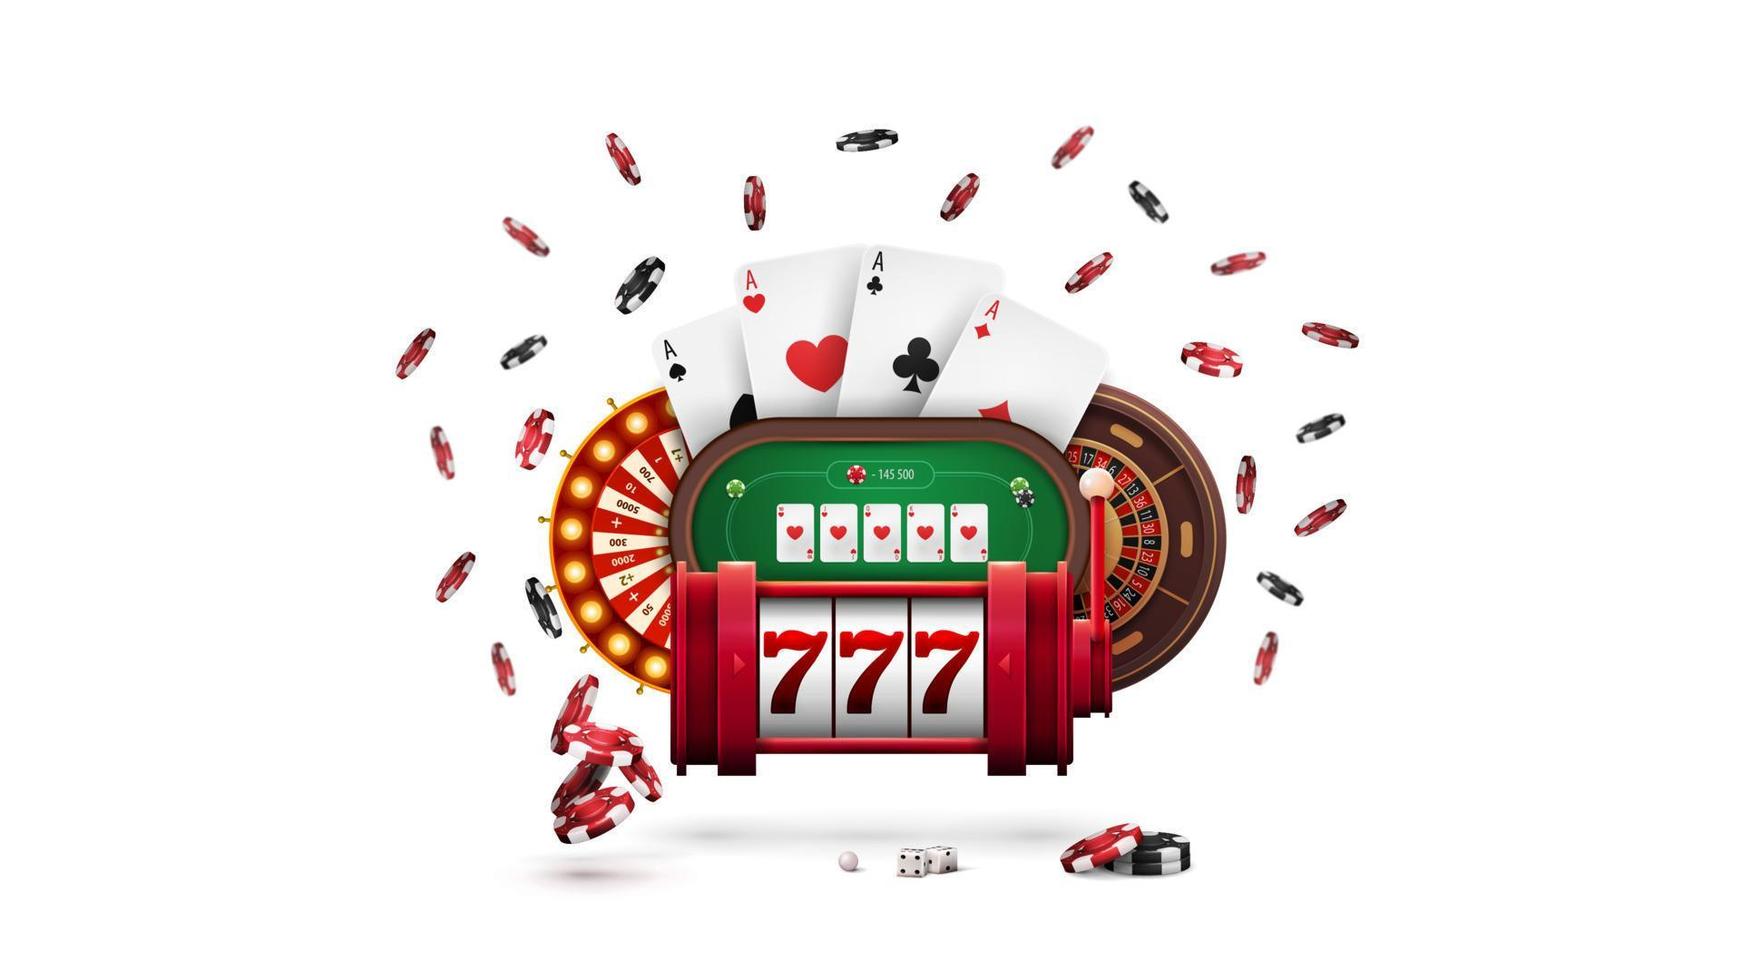 Red slot machine, Casino Wheel Fortune, Roulette wheel, Poker table, poker chips and playing cards in cartoon style isolated on white background vector